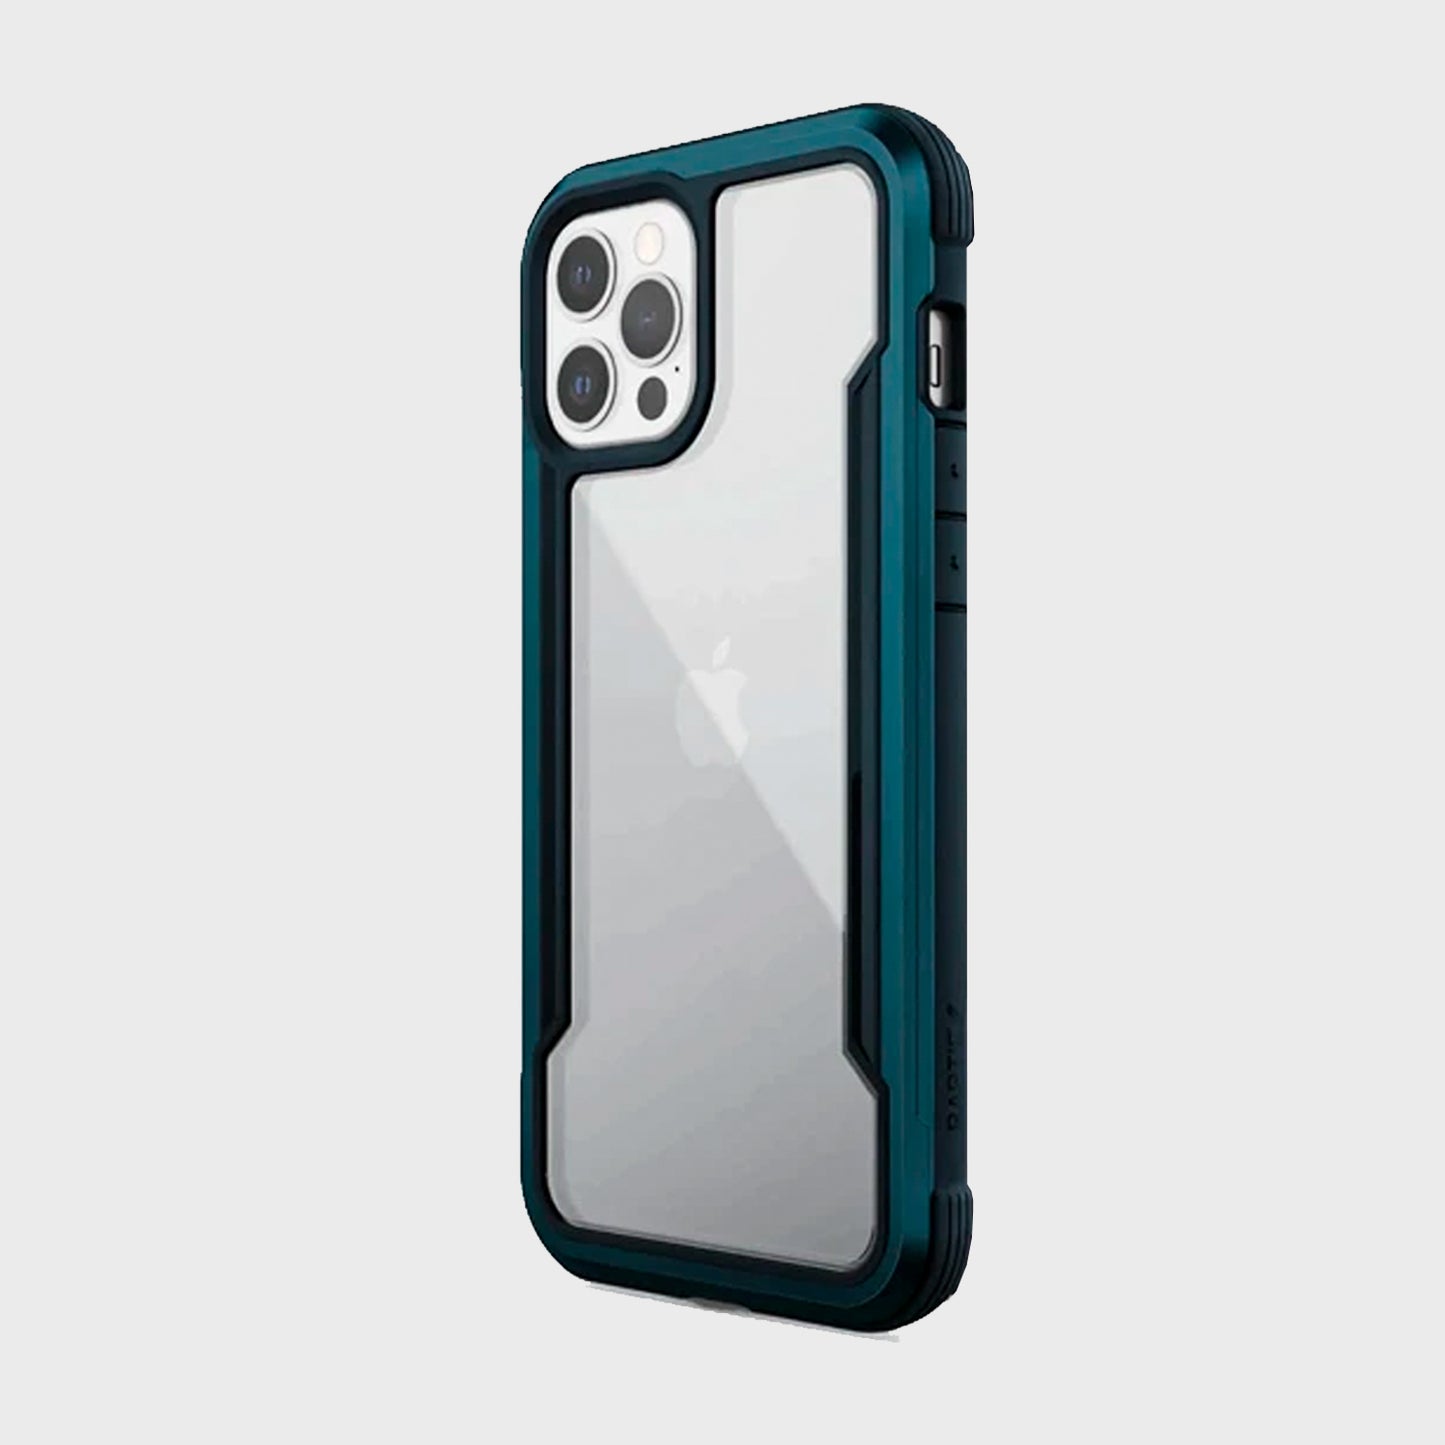 The iPhone 12 Mini Case - SHIELD by Raptic is shown in teal.